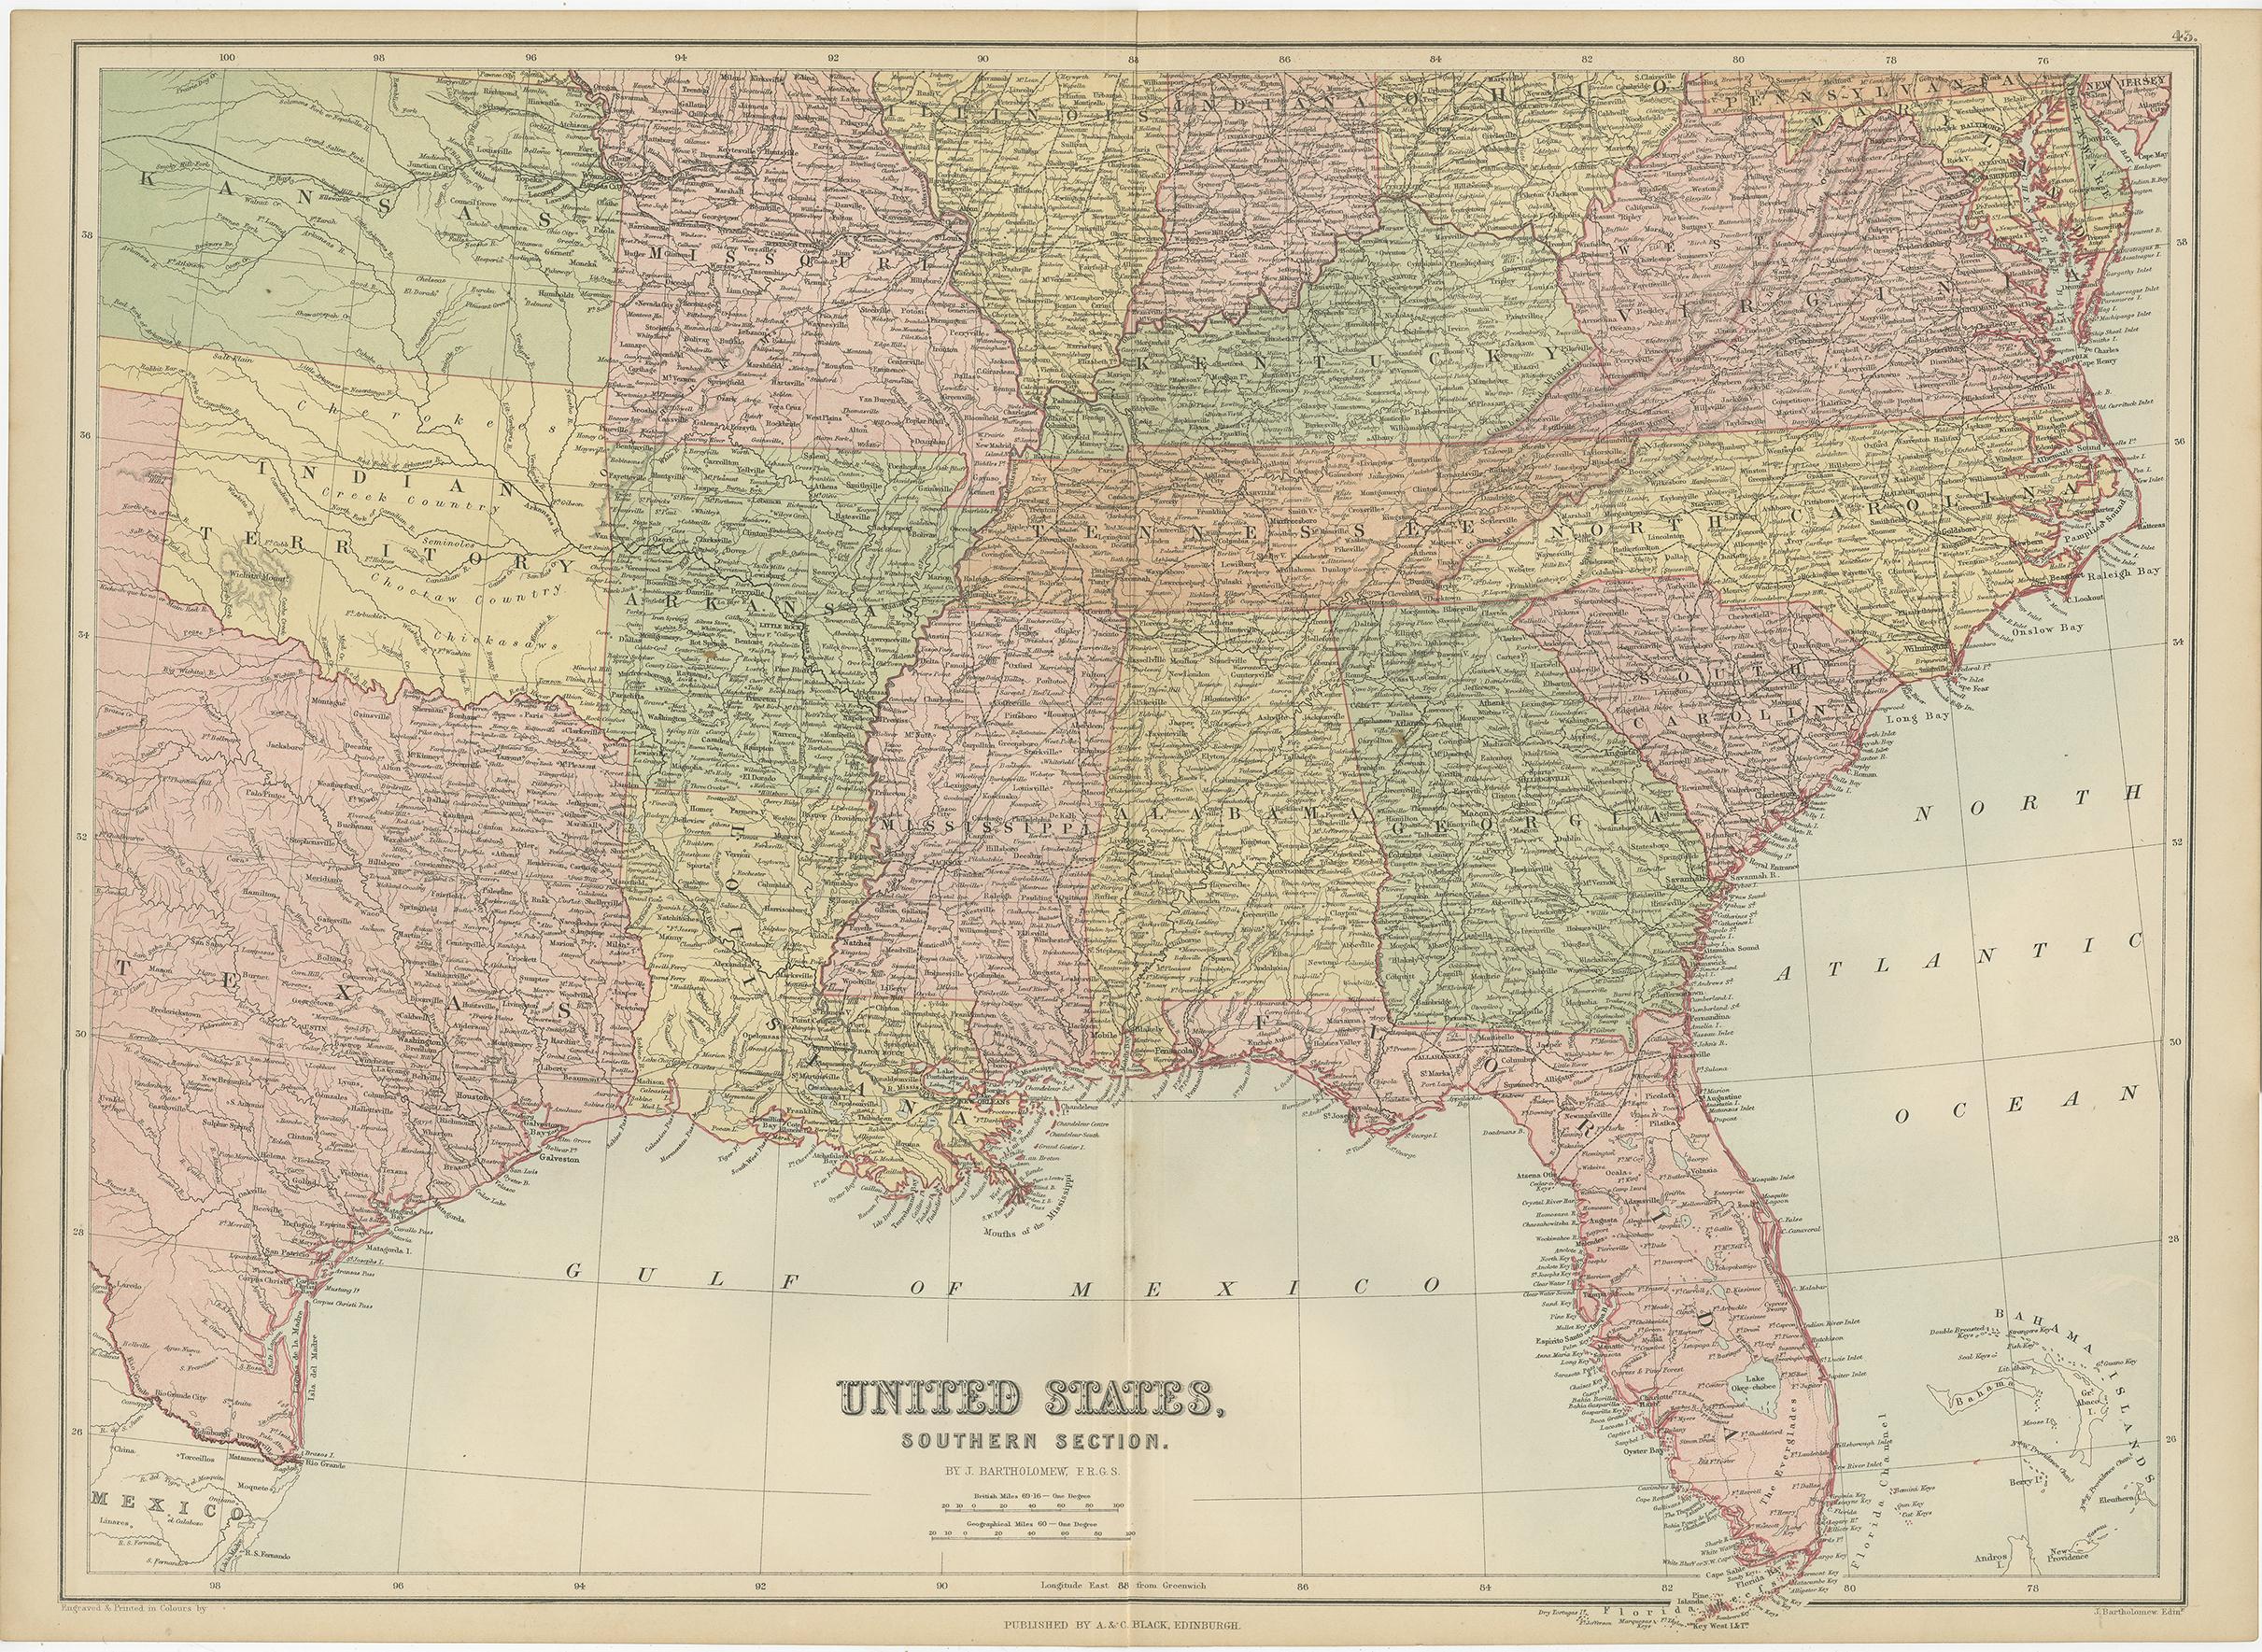 Antique map titled 'United States Southern Section'. Original antique map of Map of The United States Southern Section. This map originates from ‘Black's General Atlas of The World’. Published by A & C. Black, 1870.